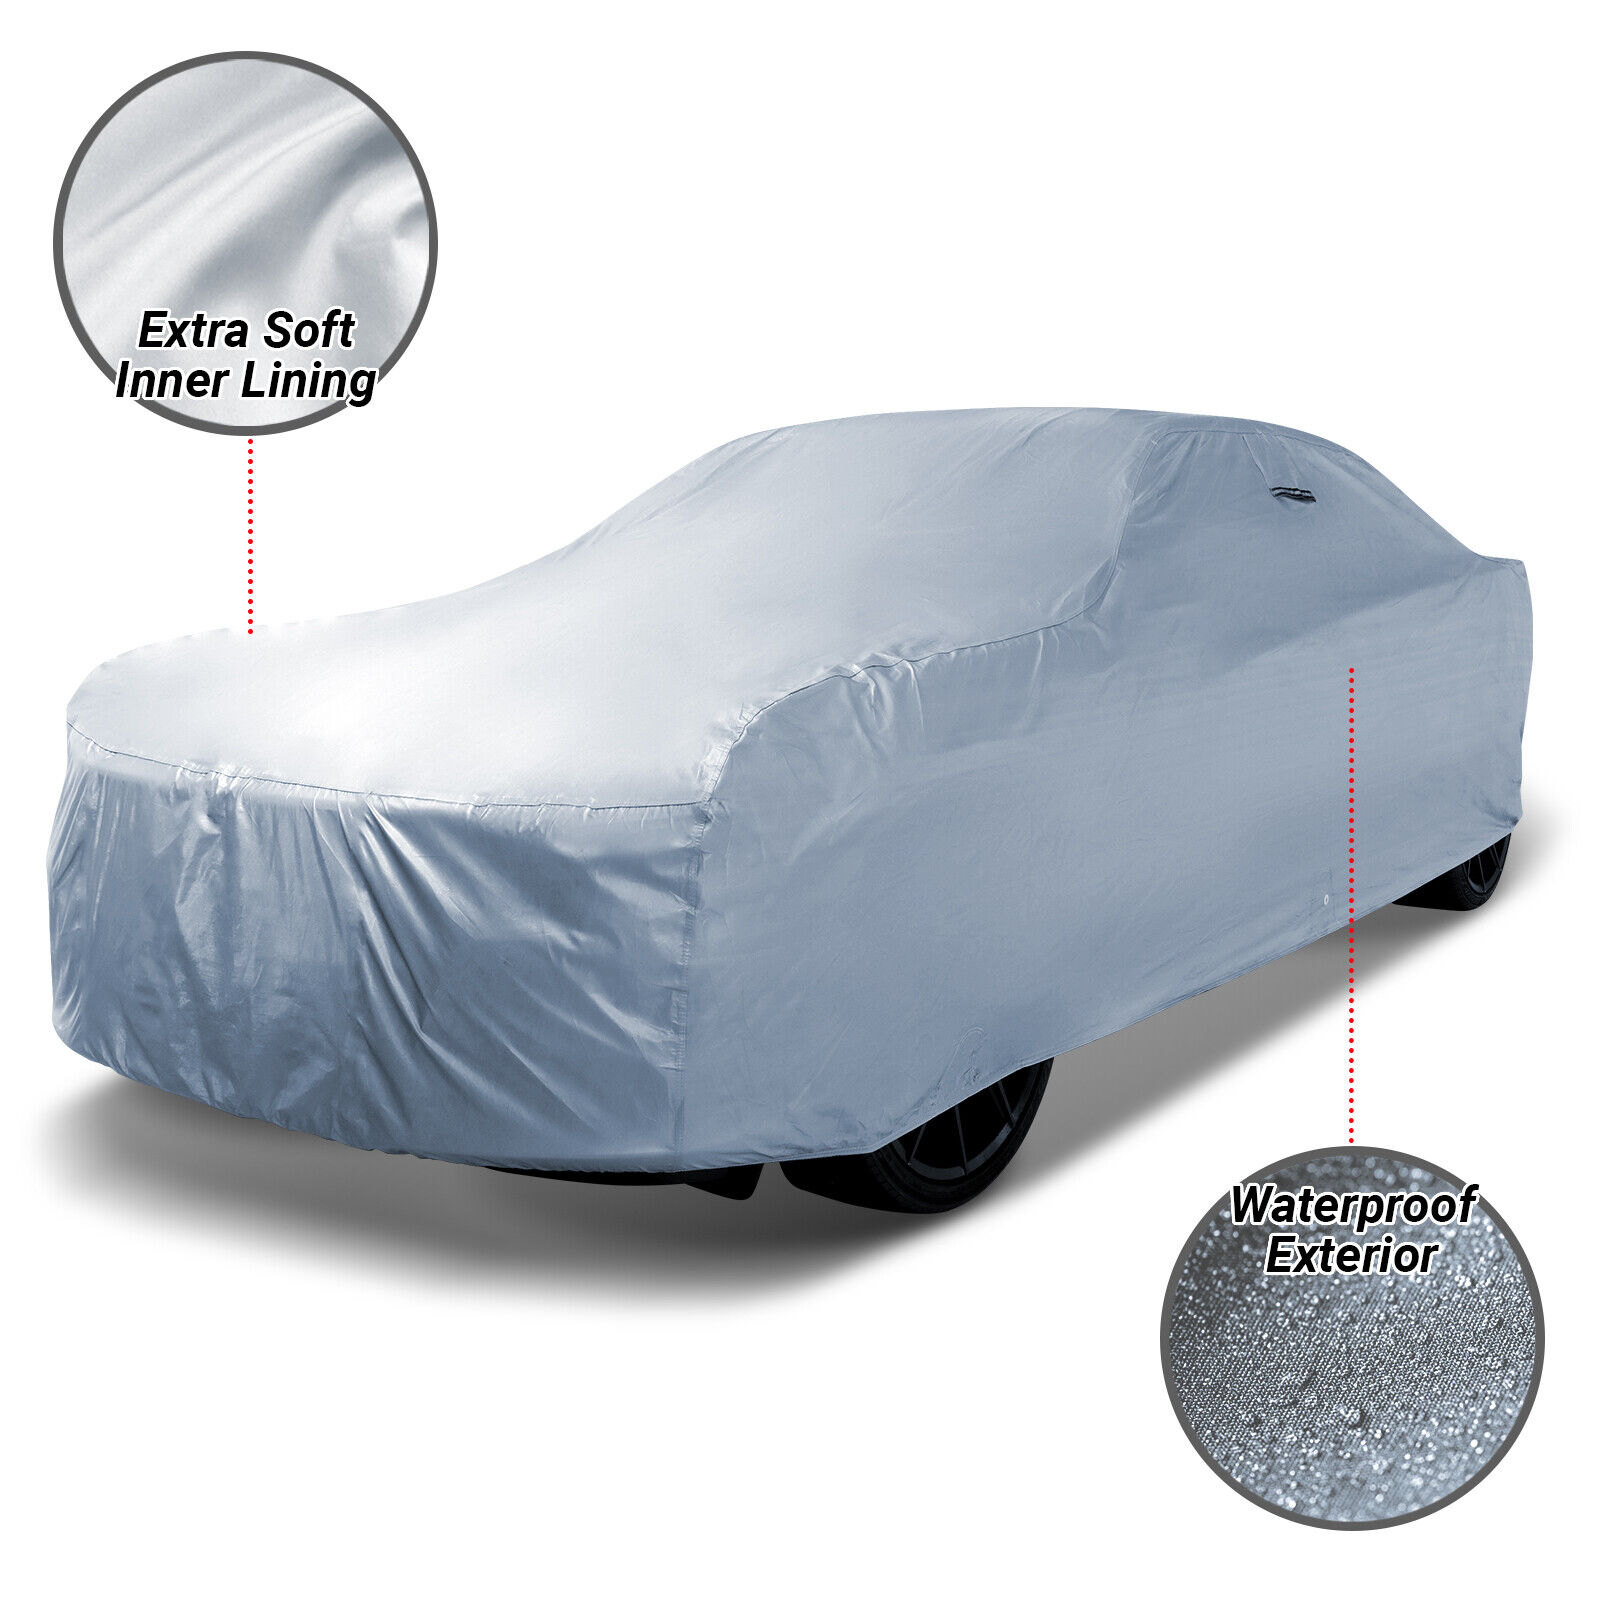 100% Waterproof / All Weather For [DODGE VIPER] Full Warranty Custom Car Cover